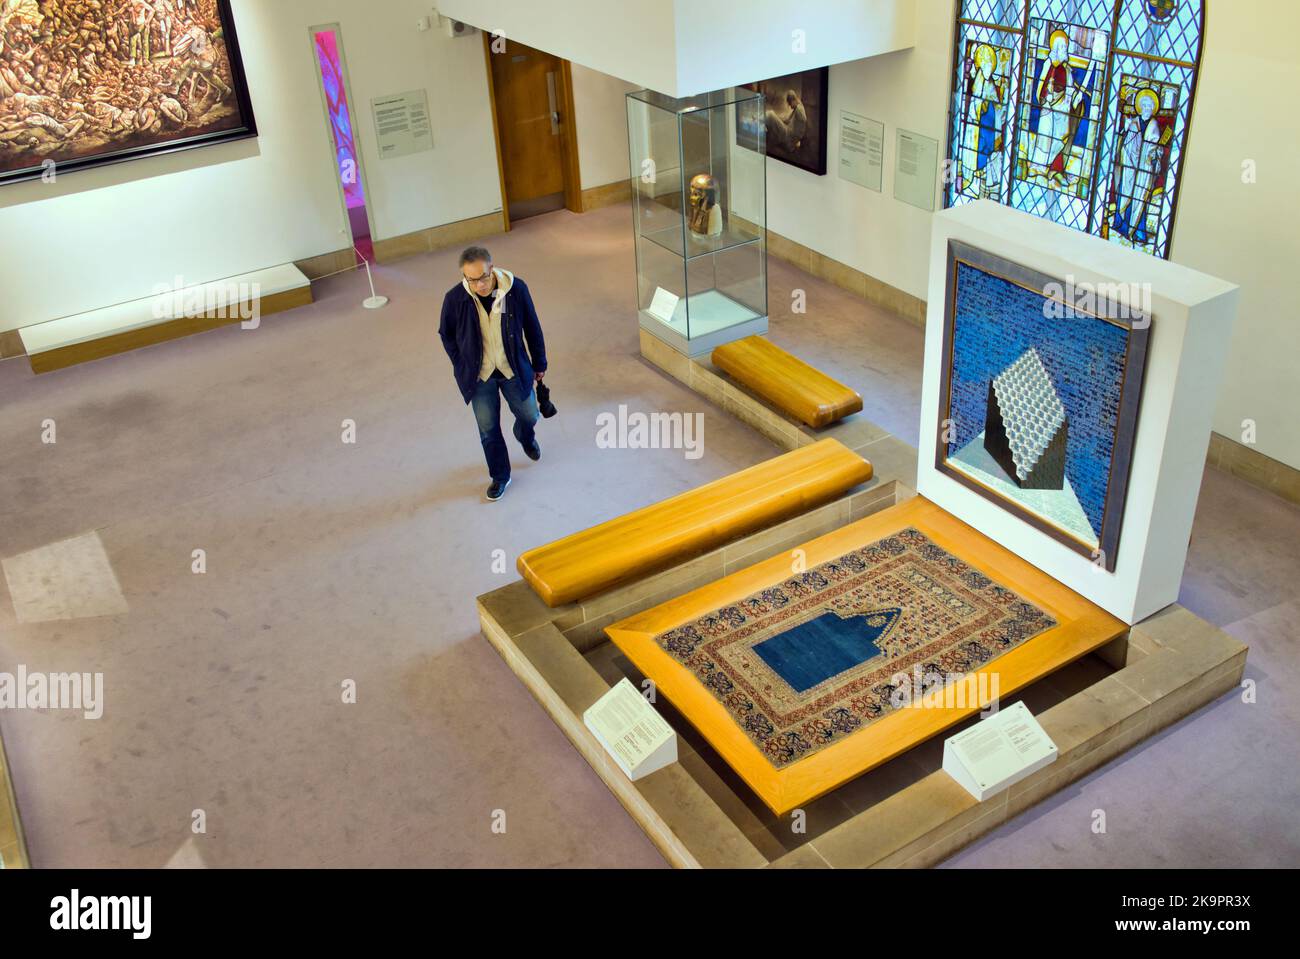 St. Mungo Museum Of Religious Life & Art  The Attributes of Divine Perception by Ahmed Moustafa Stock Photo